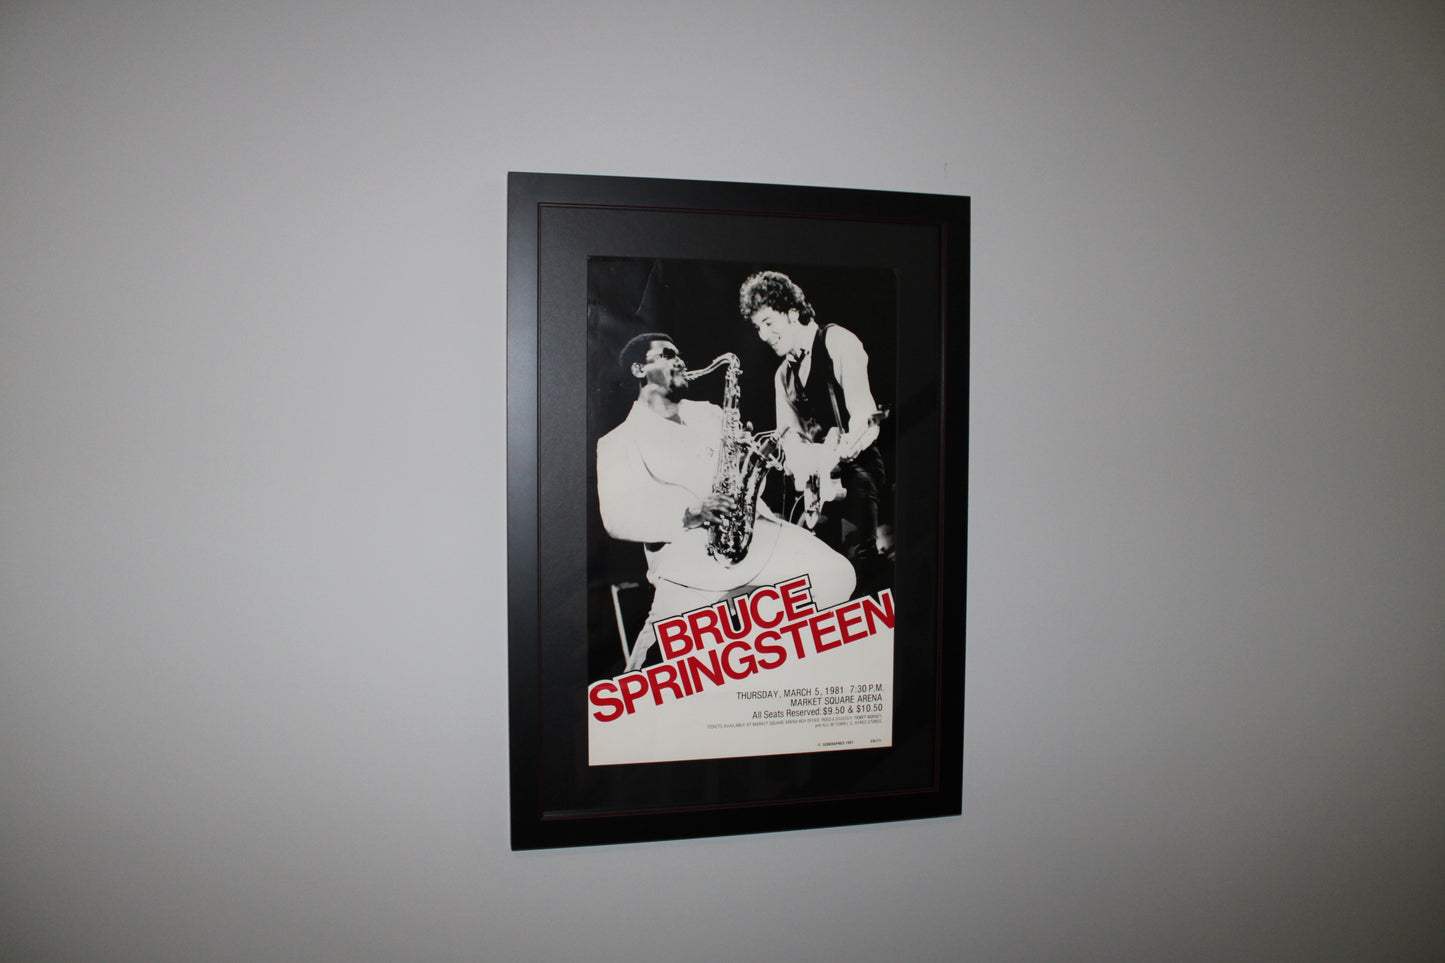 Bruce Springsteen & The ESB Concert Tour Promotion Poster - SERIGRAPHICS 1981 - CA029